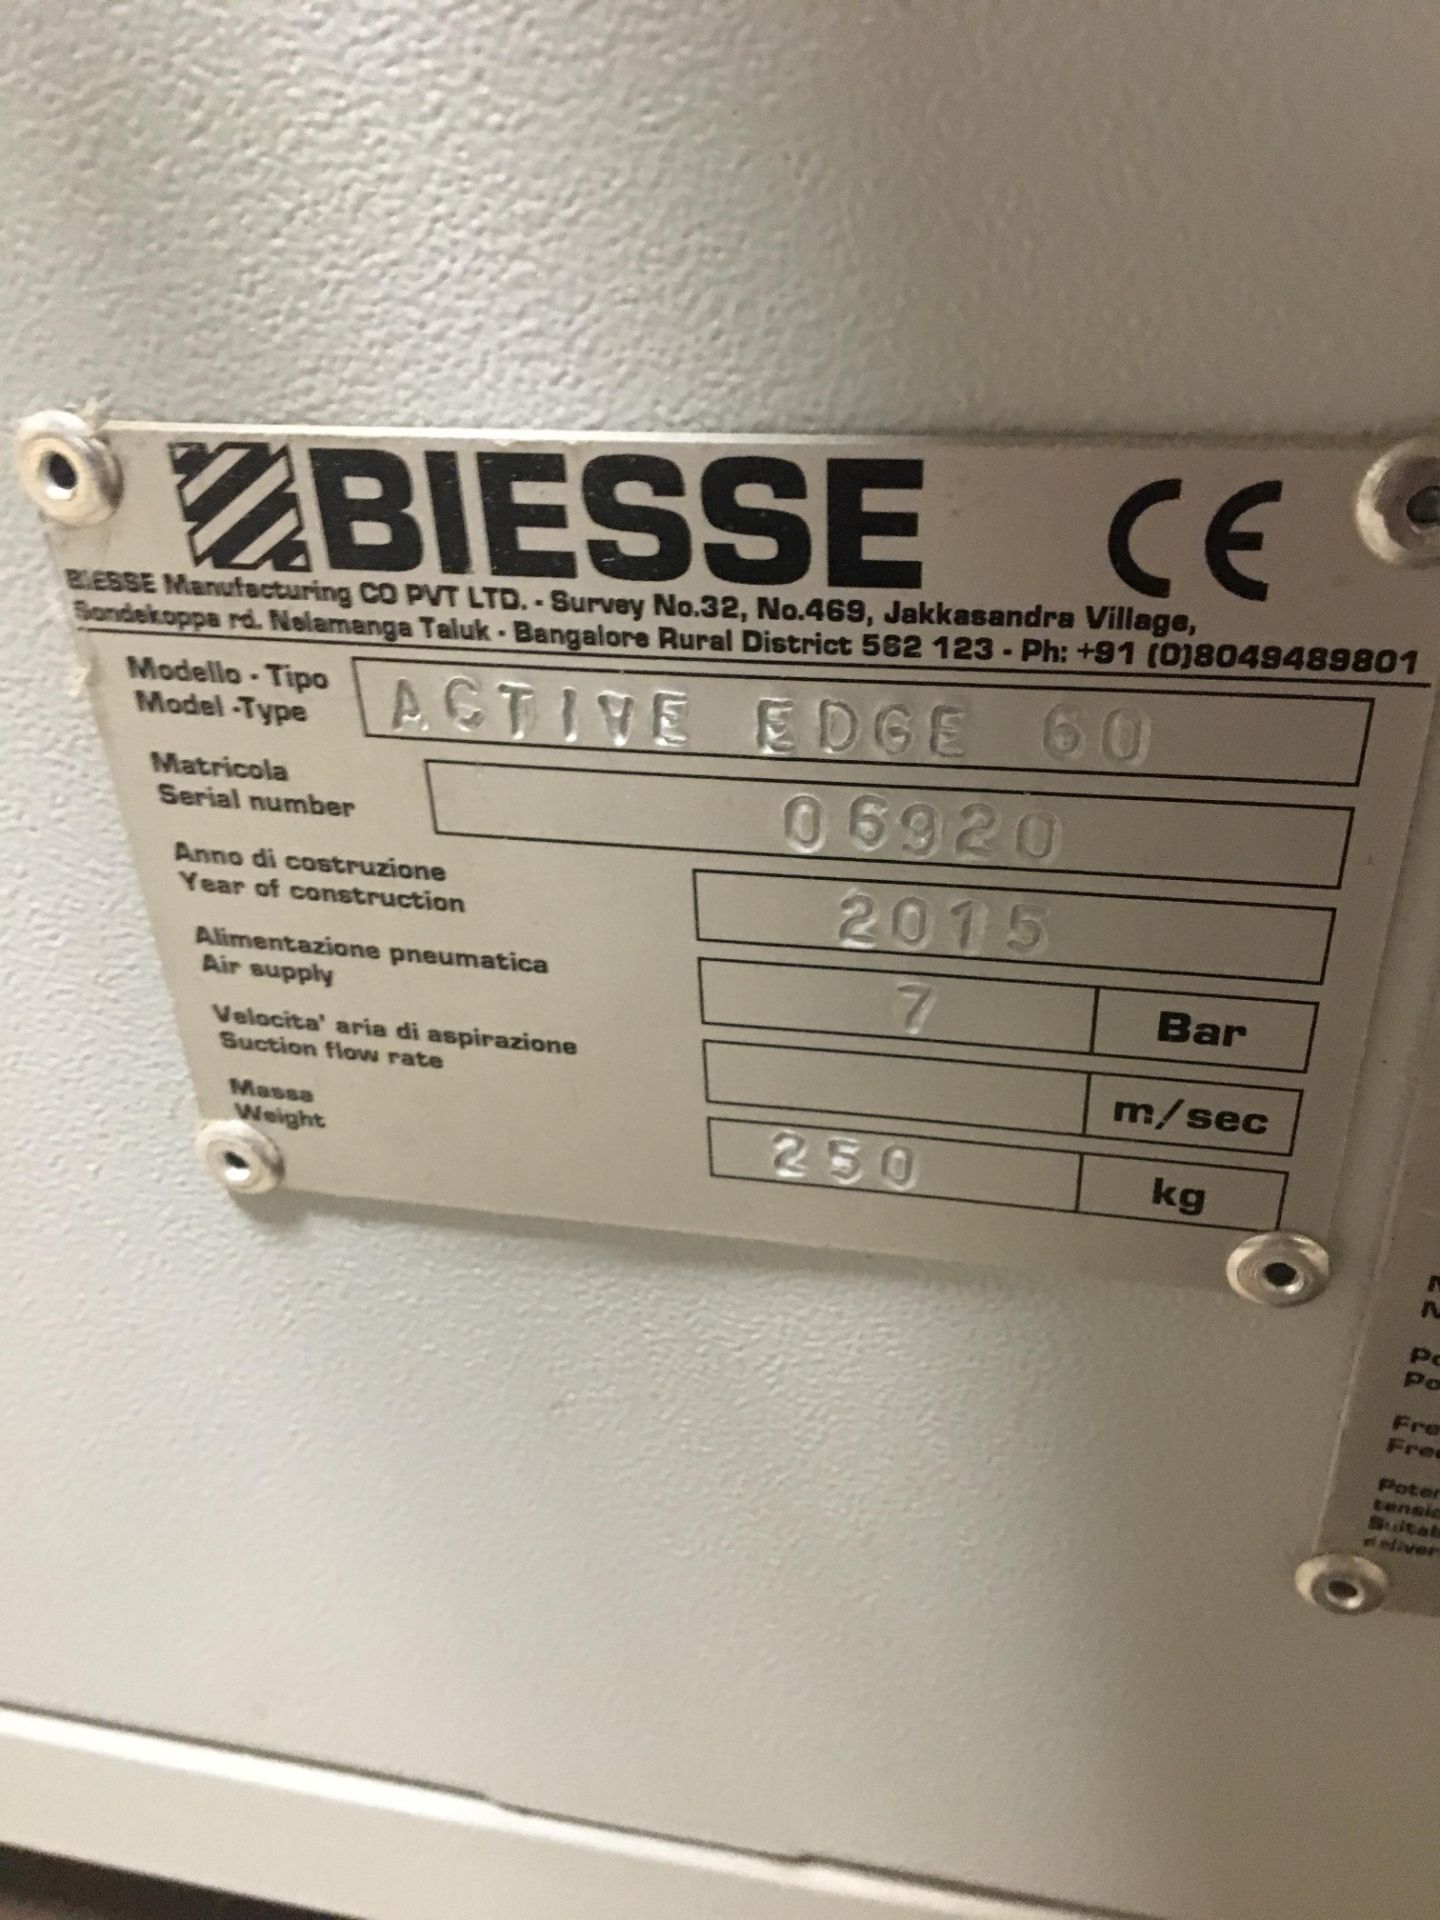 Biesse Active Edge 60 single sided edge bander, Serial No. 06920 (2015). Weight: 250 kg; table size: - Image 4 of 5